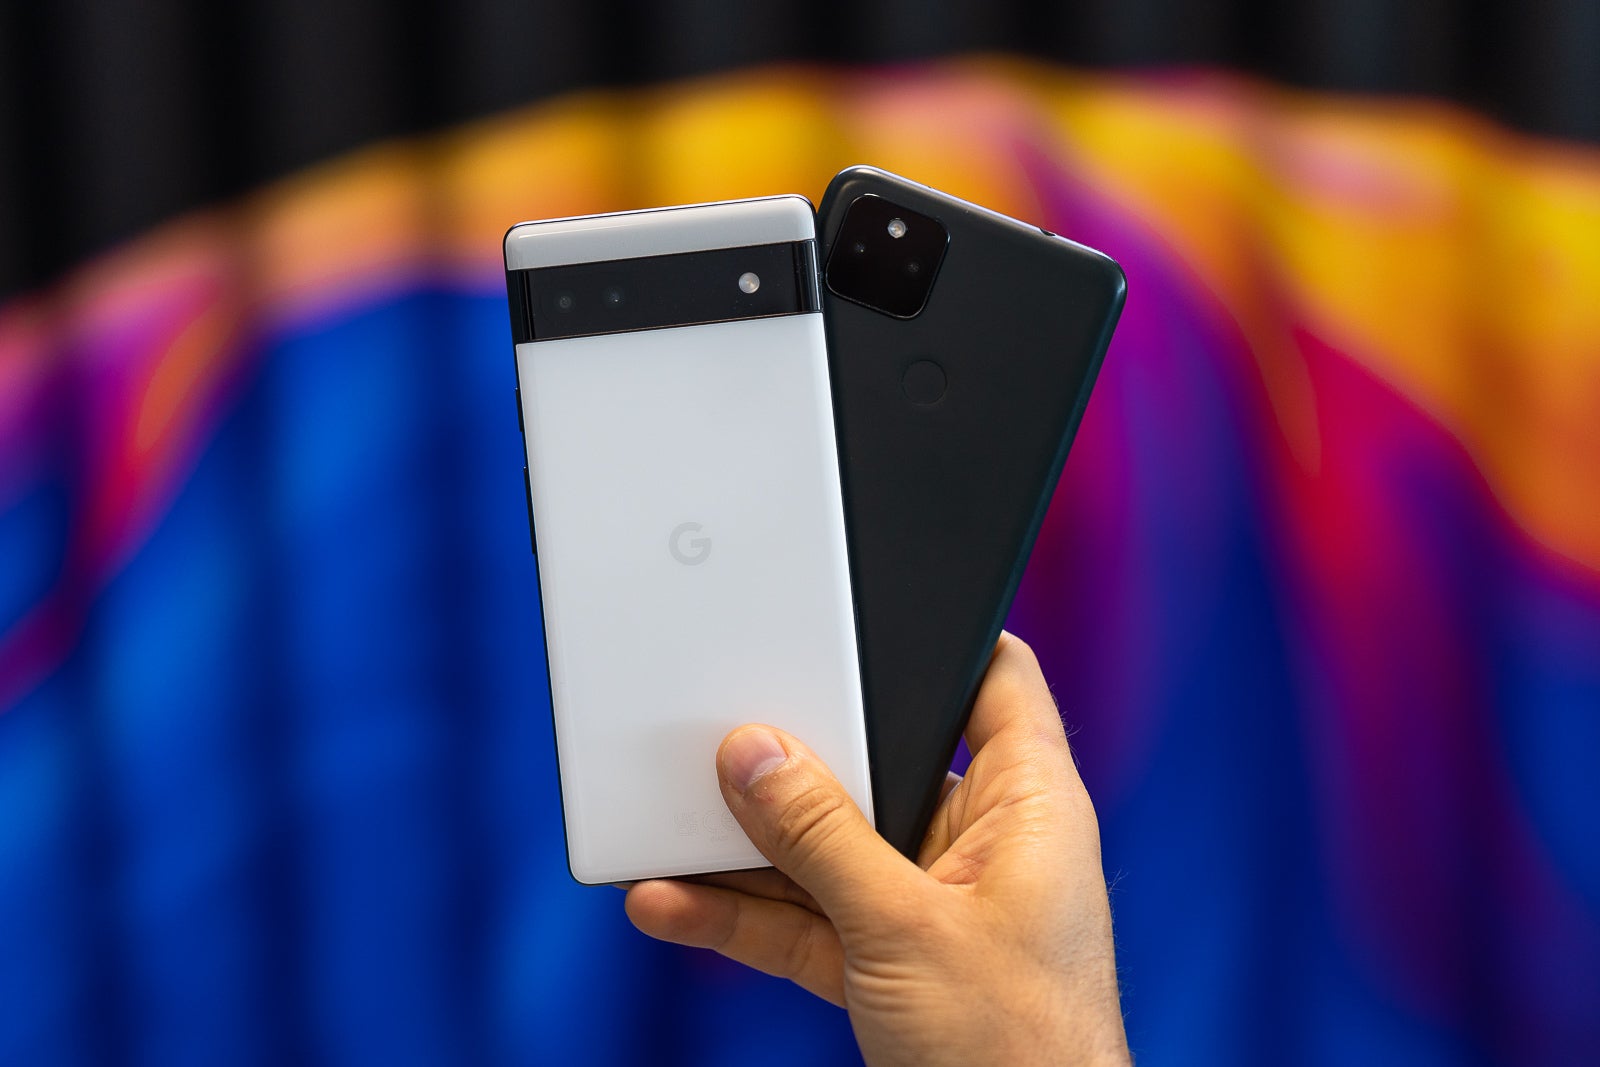 The Pixel 6a (left) and Pixel 5a (right) - Google Pixel 6a vs Pixel 5a comparison: Twice the performance!